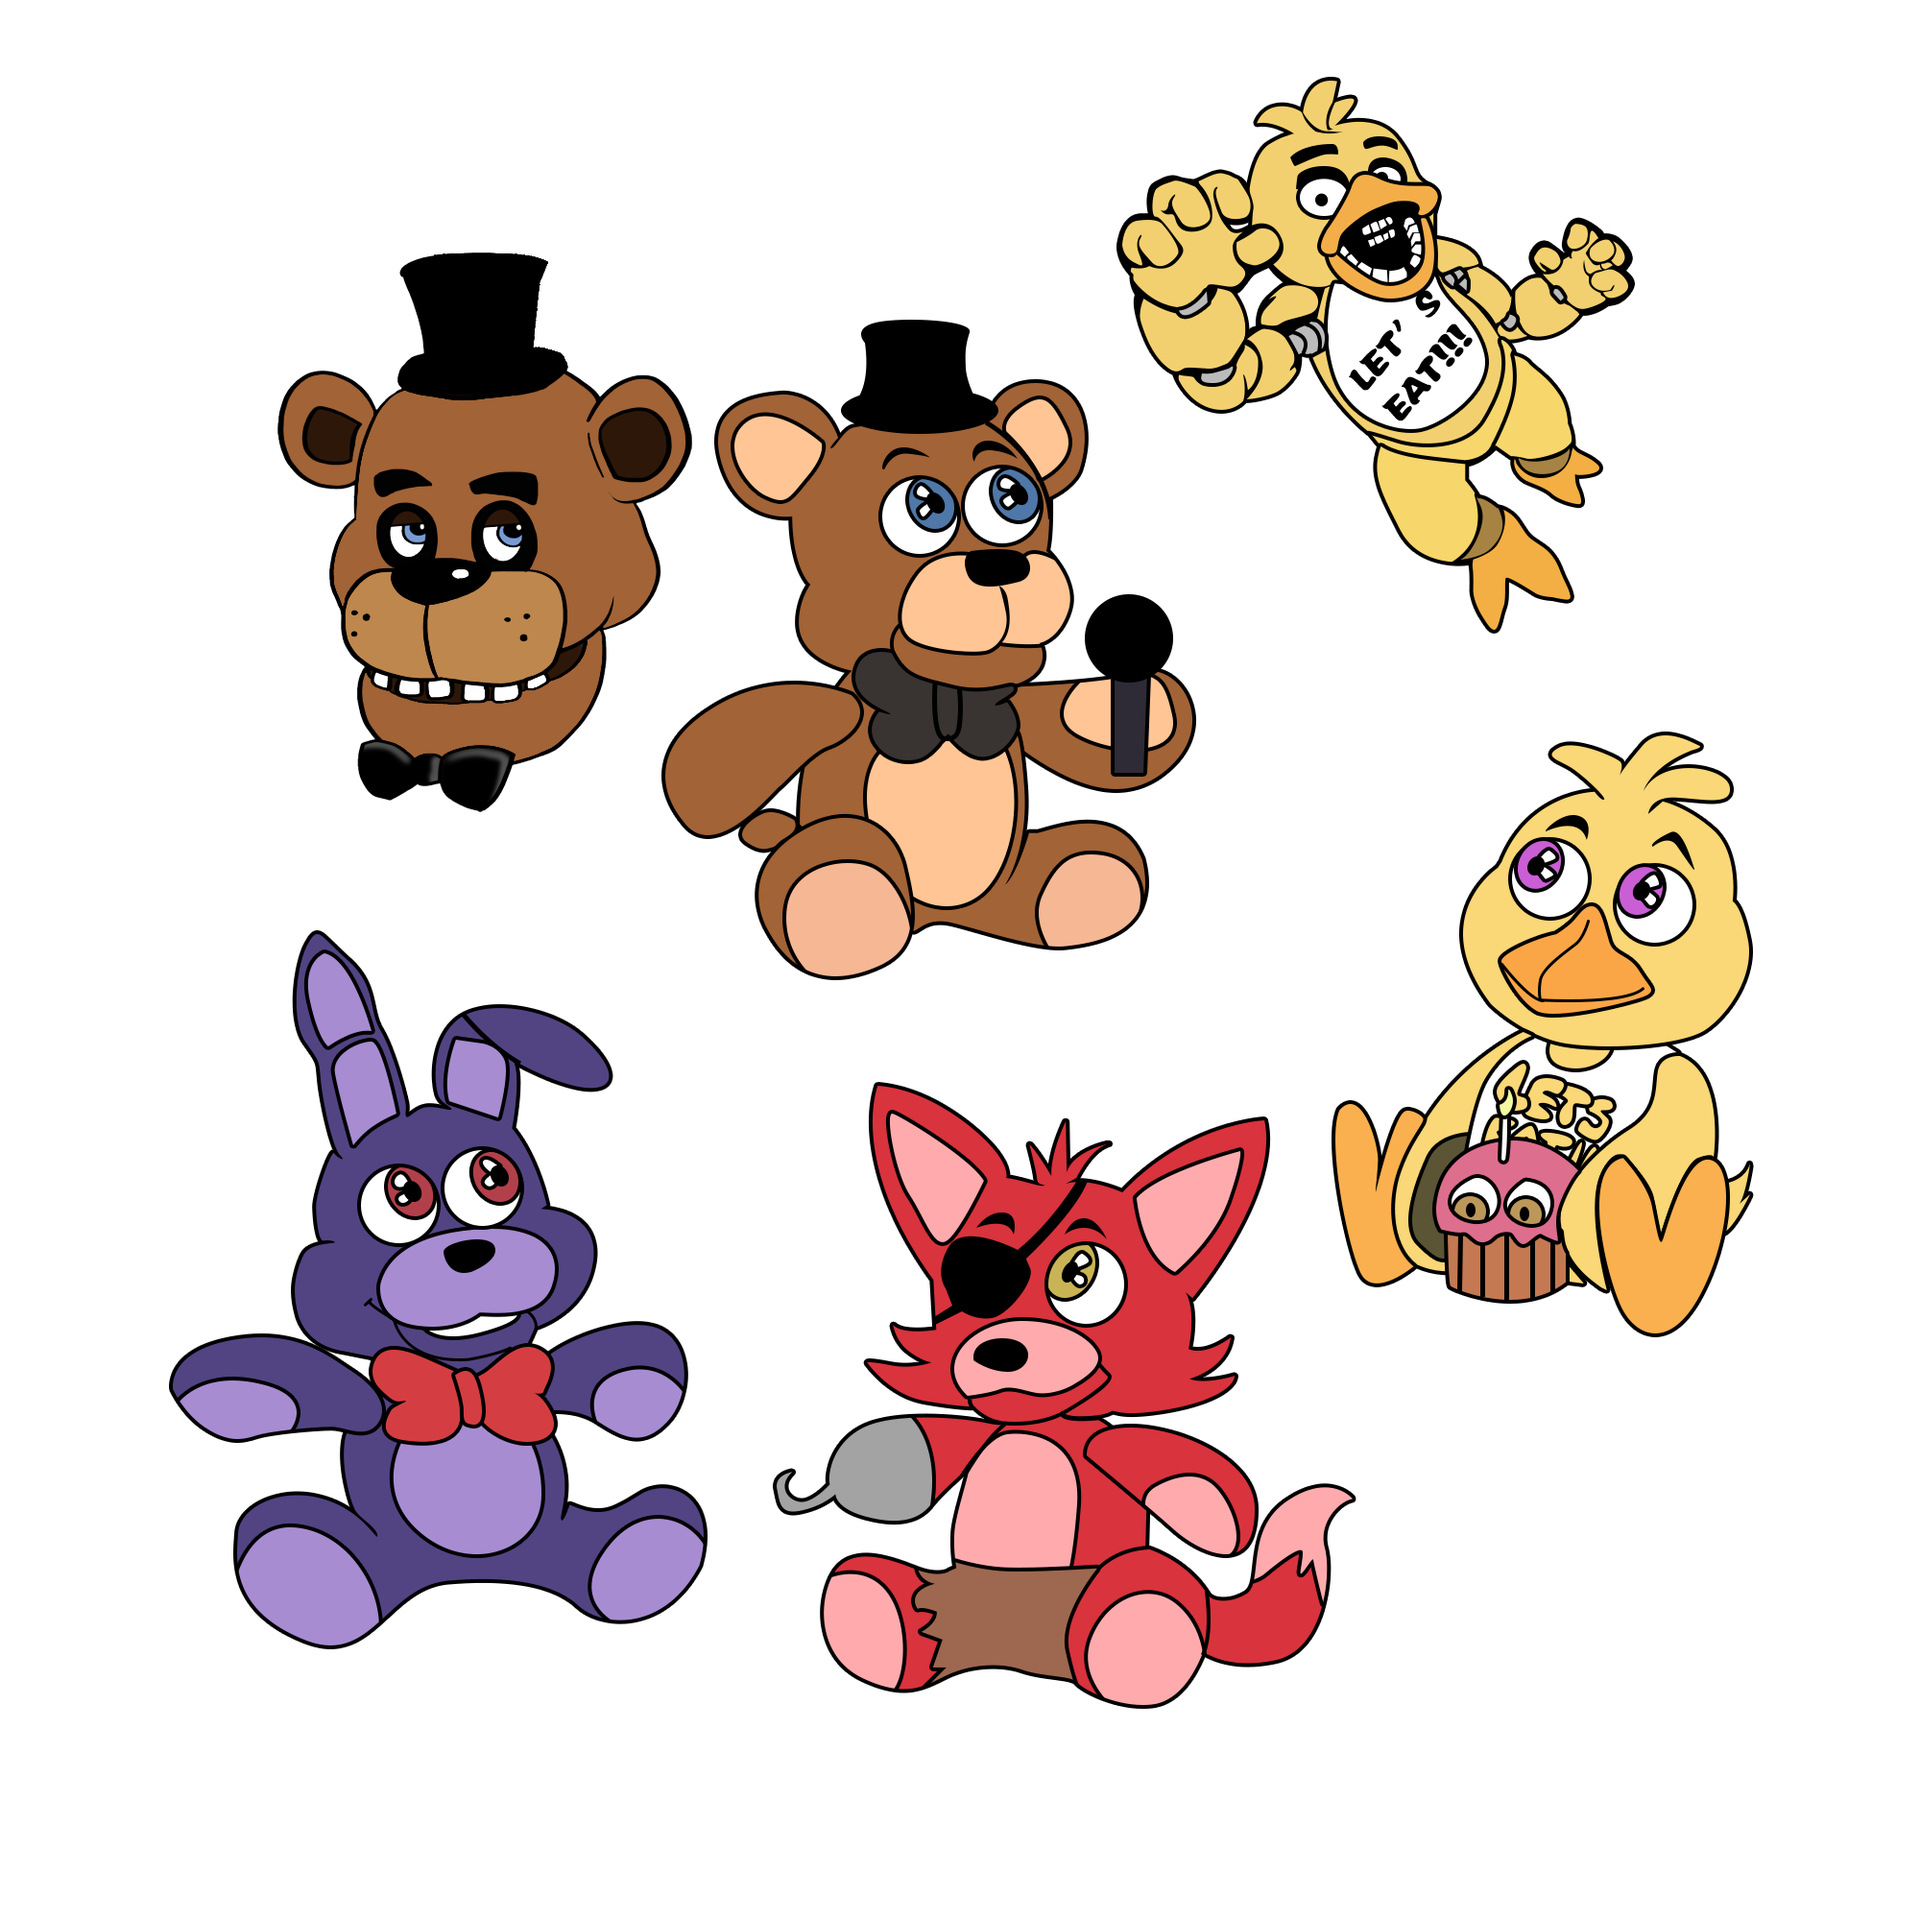 Five Nights at Freddy's anime pin